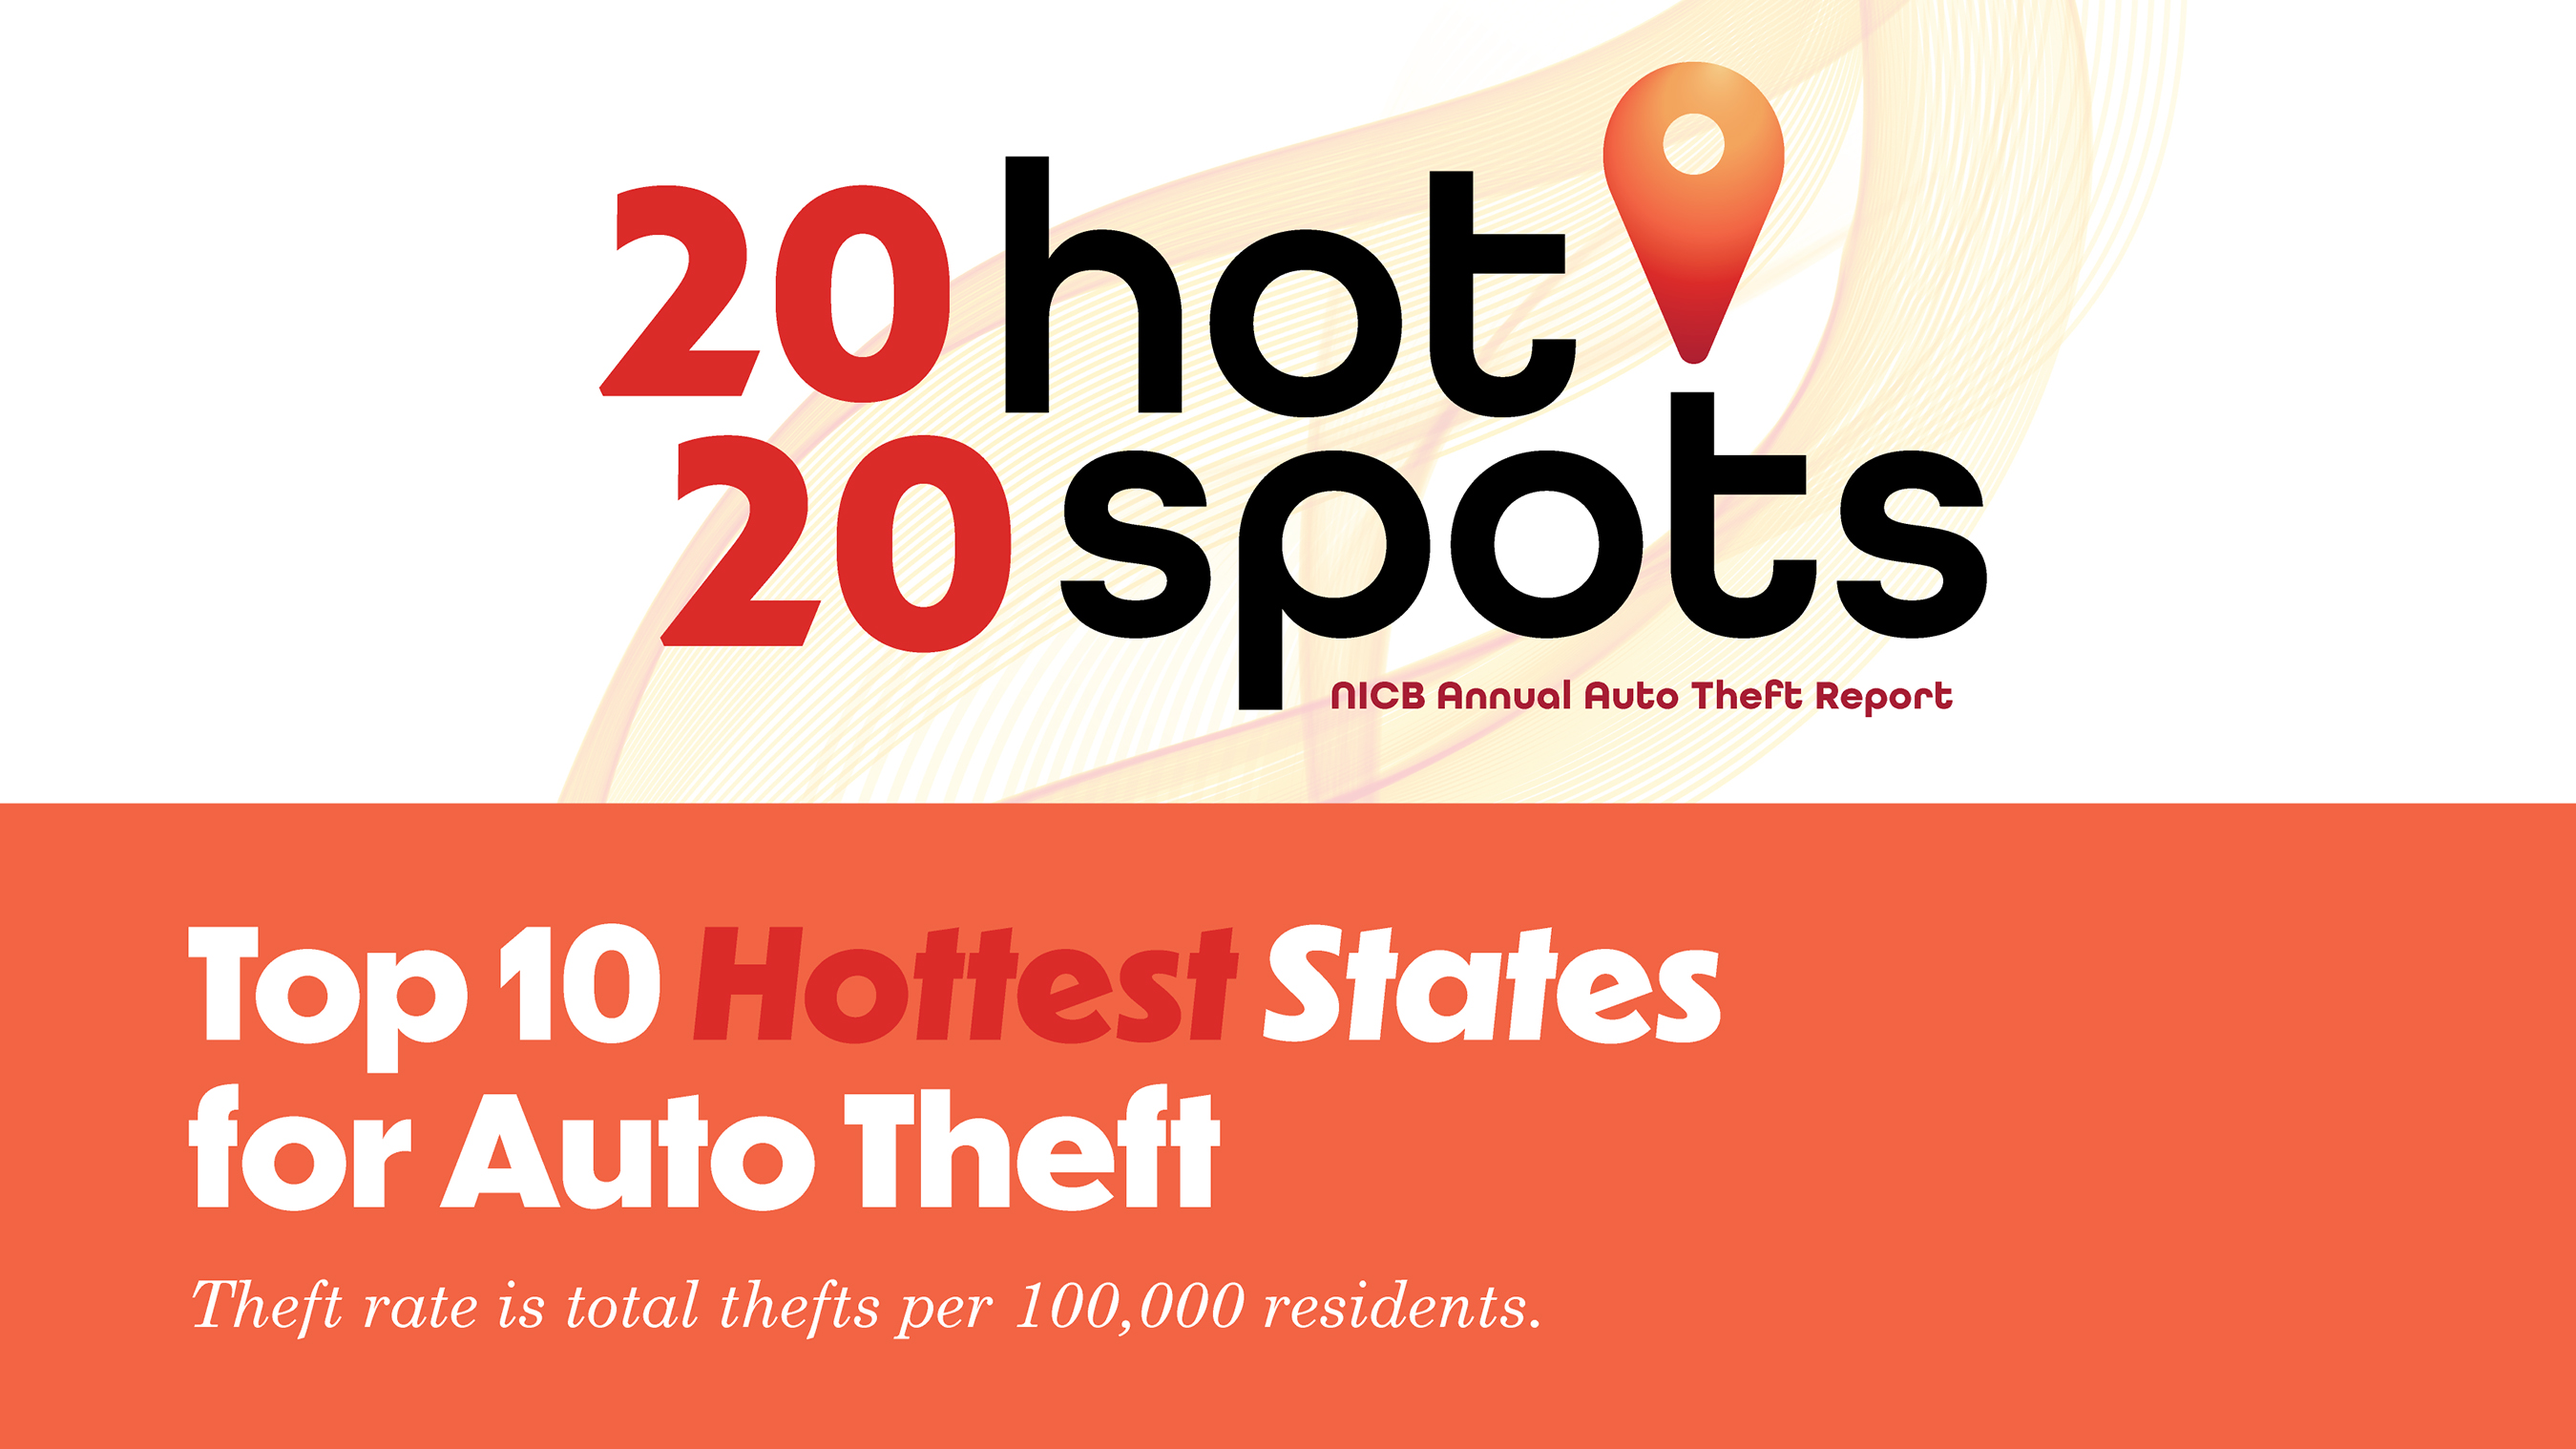 Hot Spots Infographic